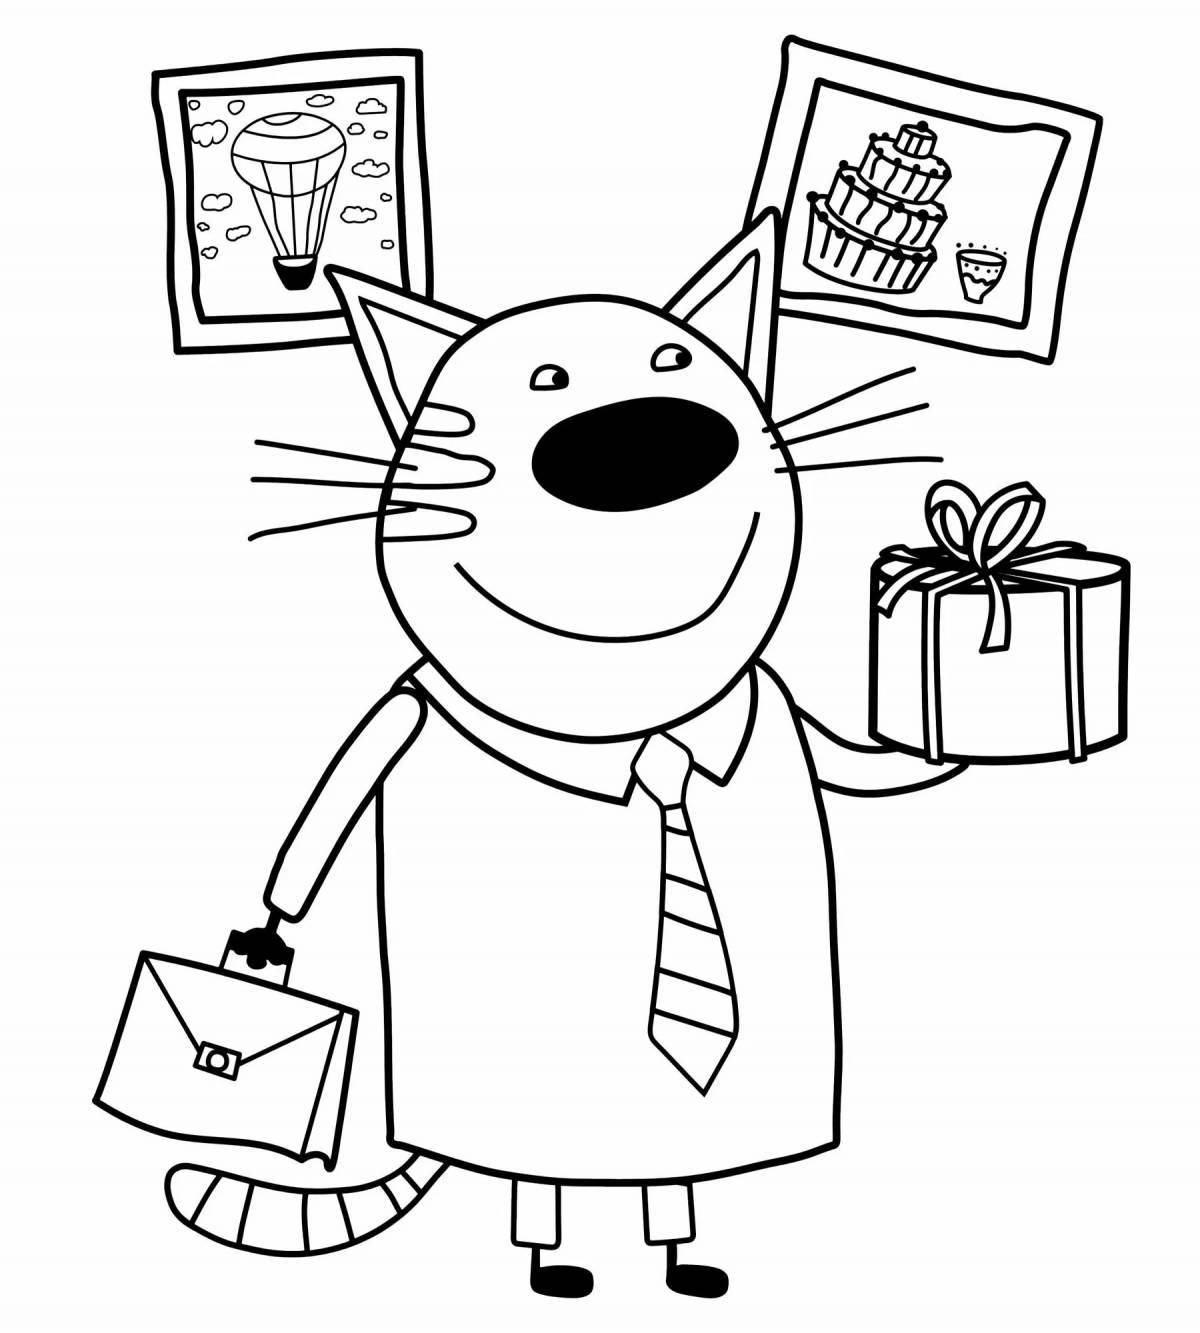 Cute three cats coloring pages for kids